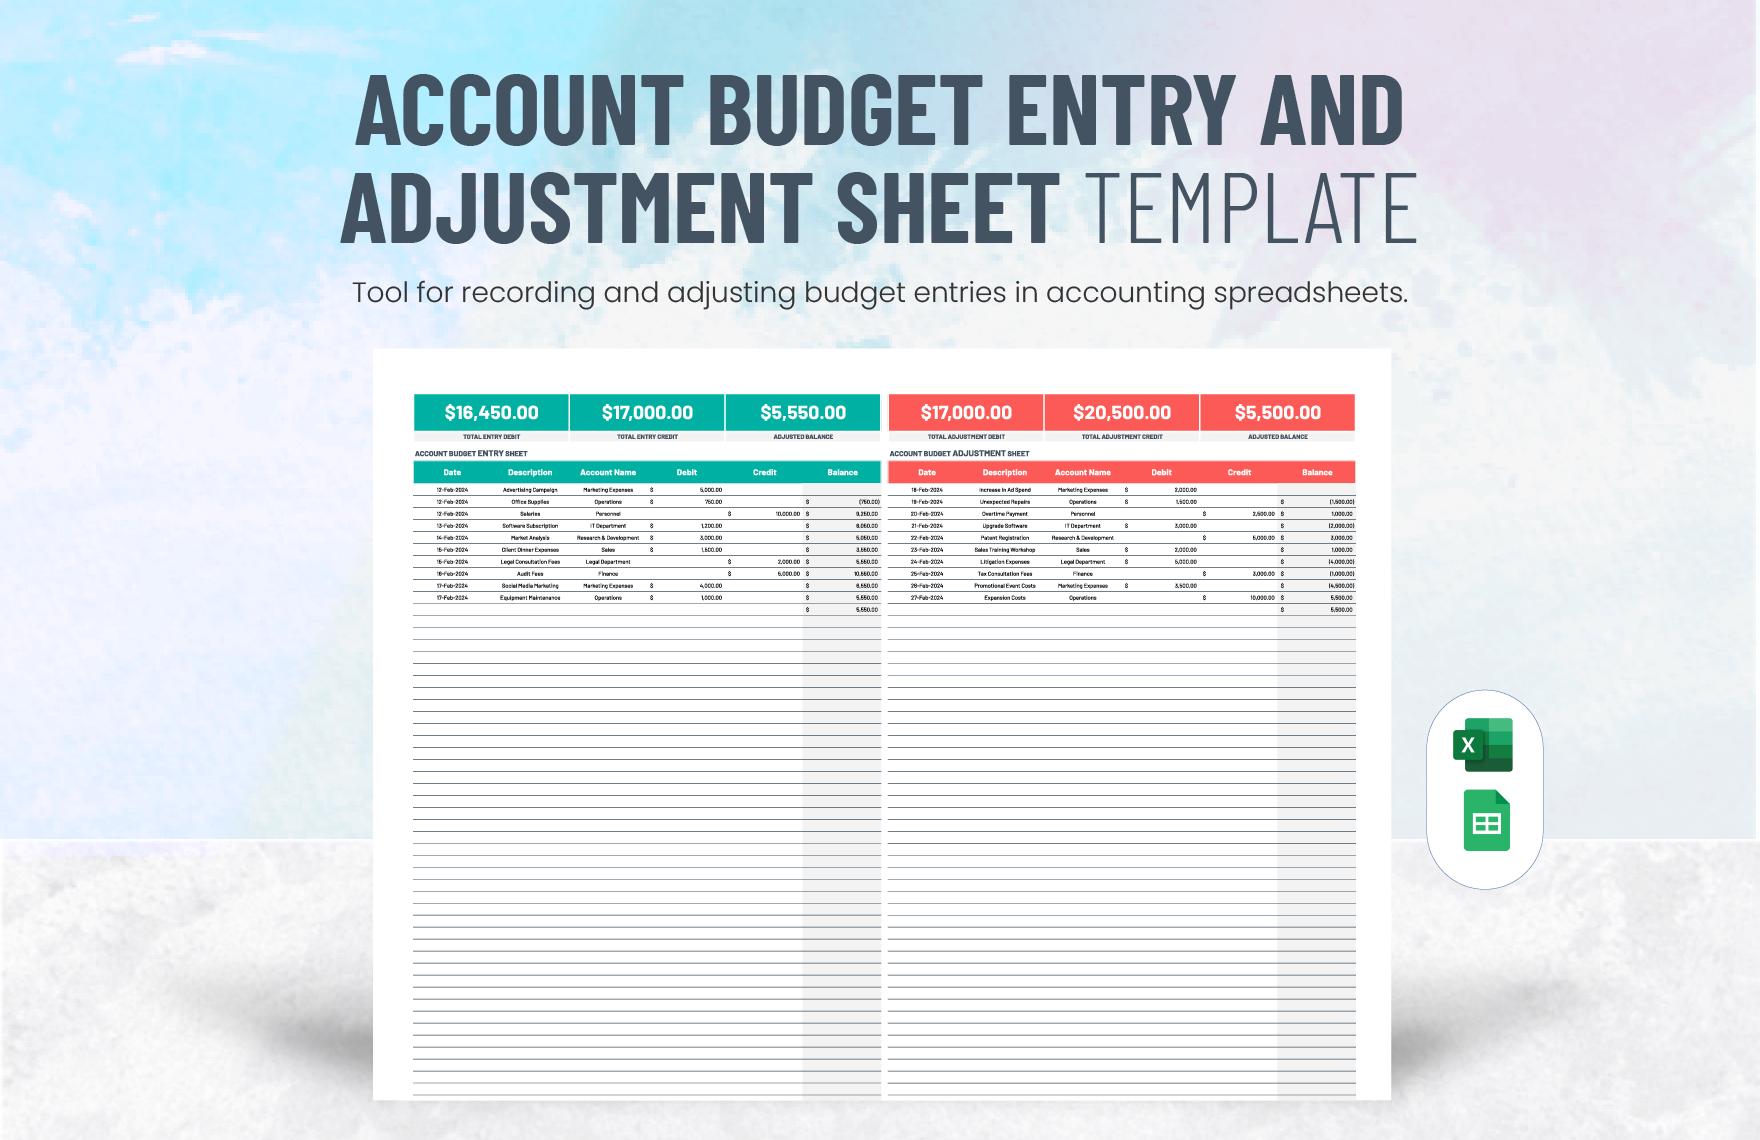 Account Budget Entry and Adjustment Sheet Template